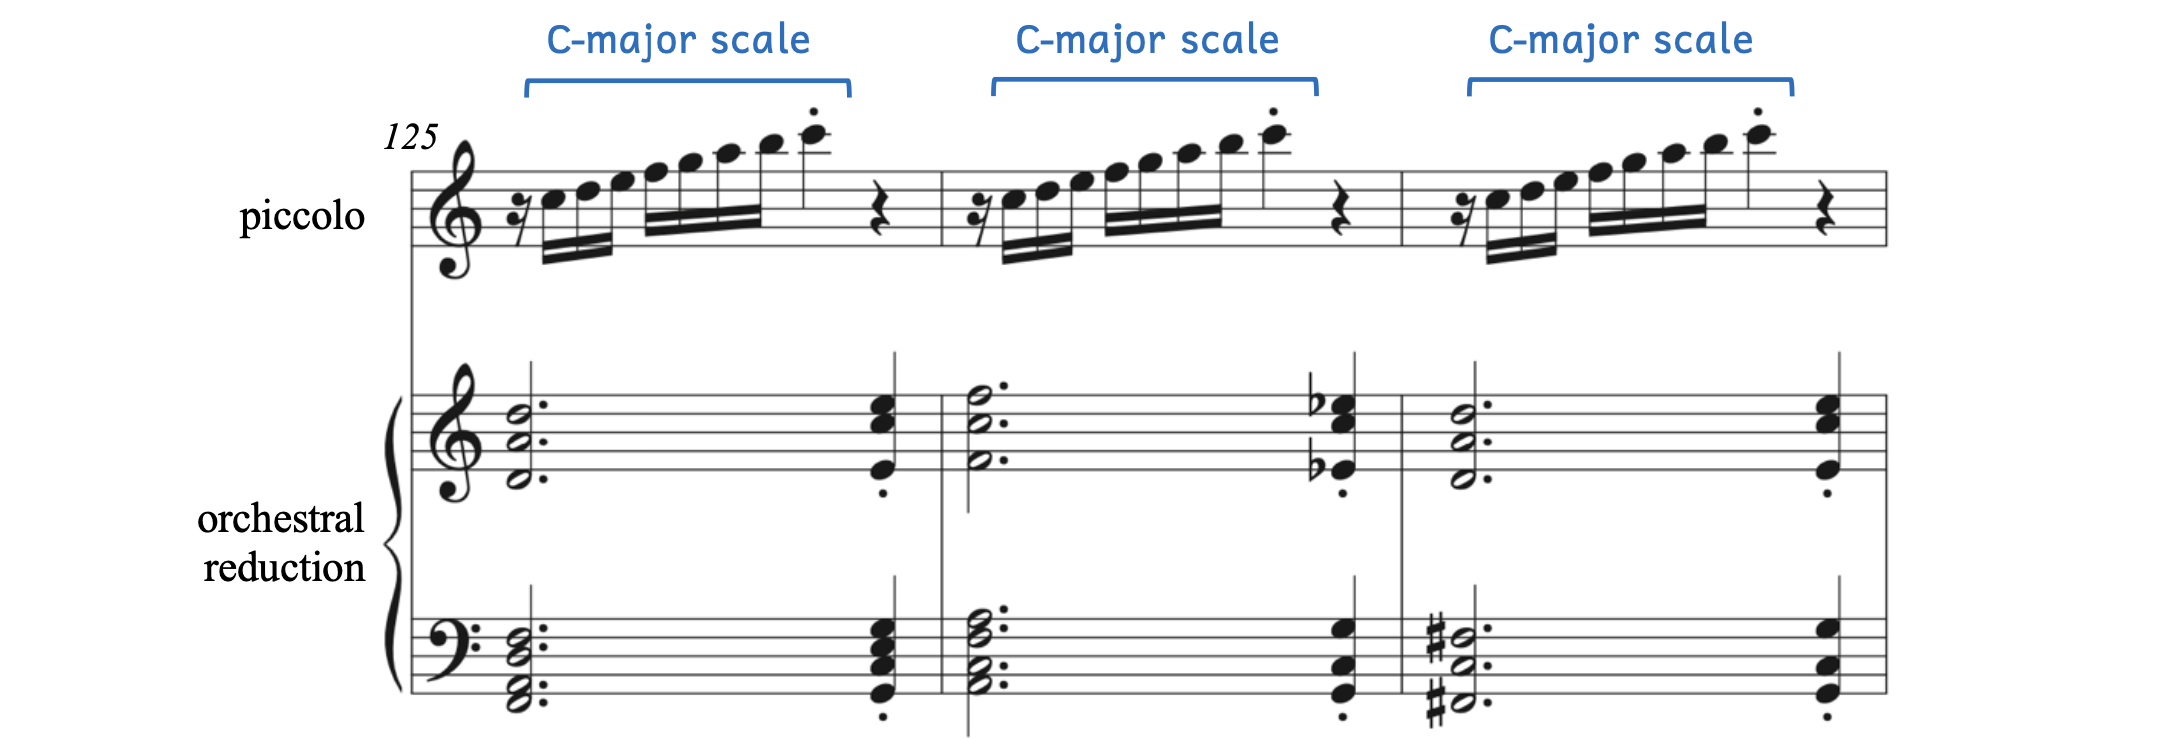 Beethoven, Symphony No. 5 in C Minor, Op. 67, fourth movement - Allegro. There are three ascending C-major scales in the piccolo.